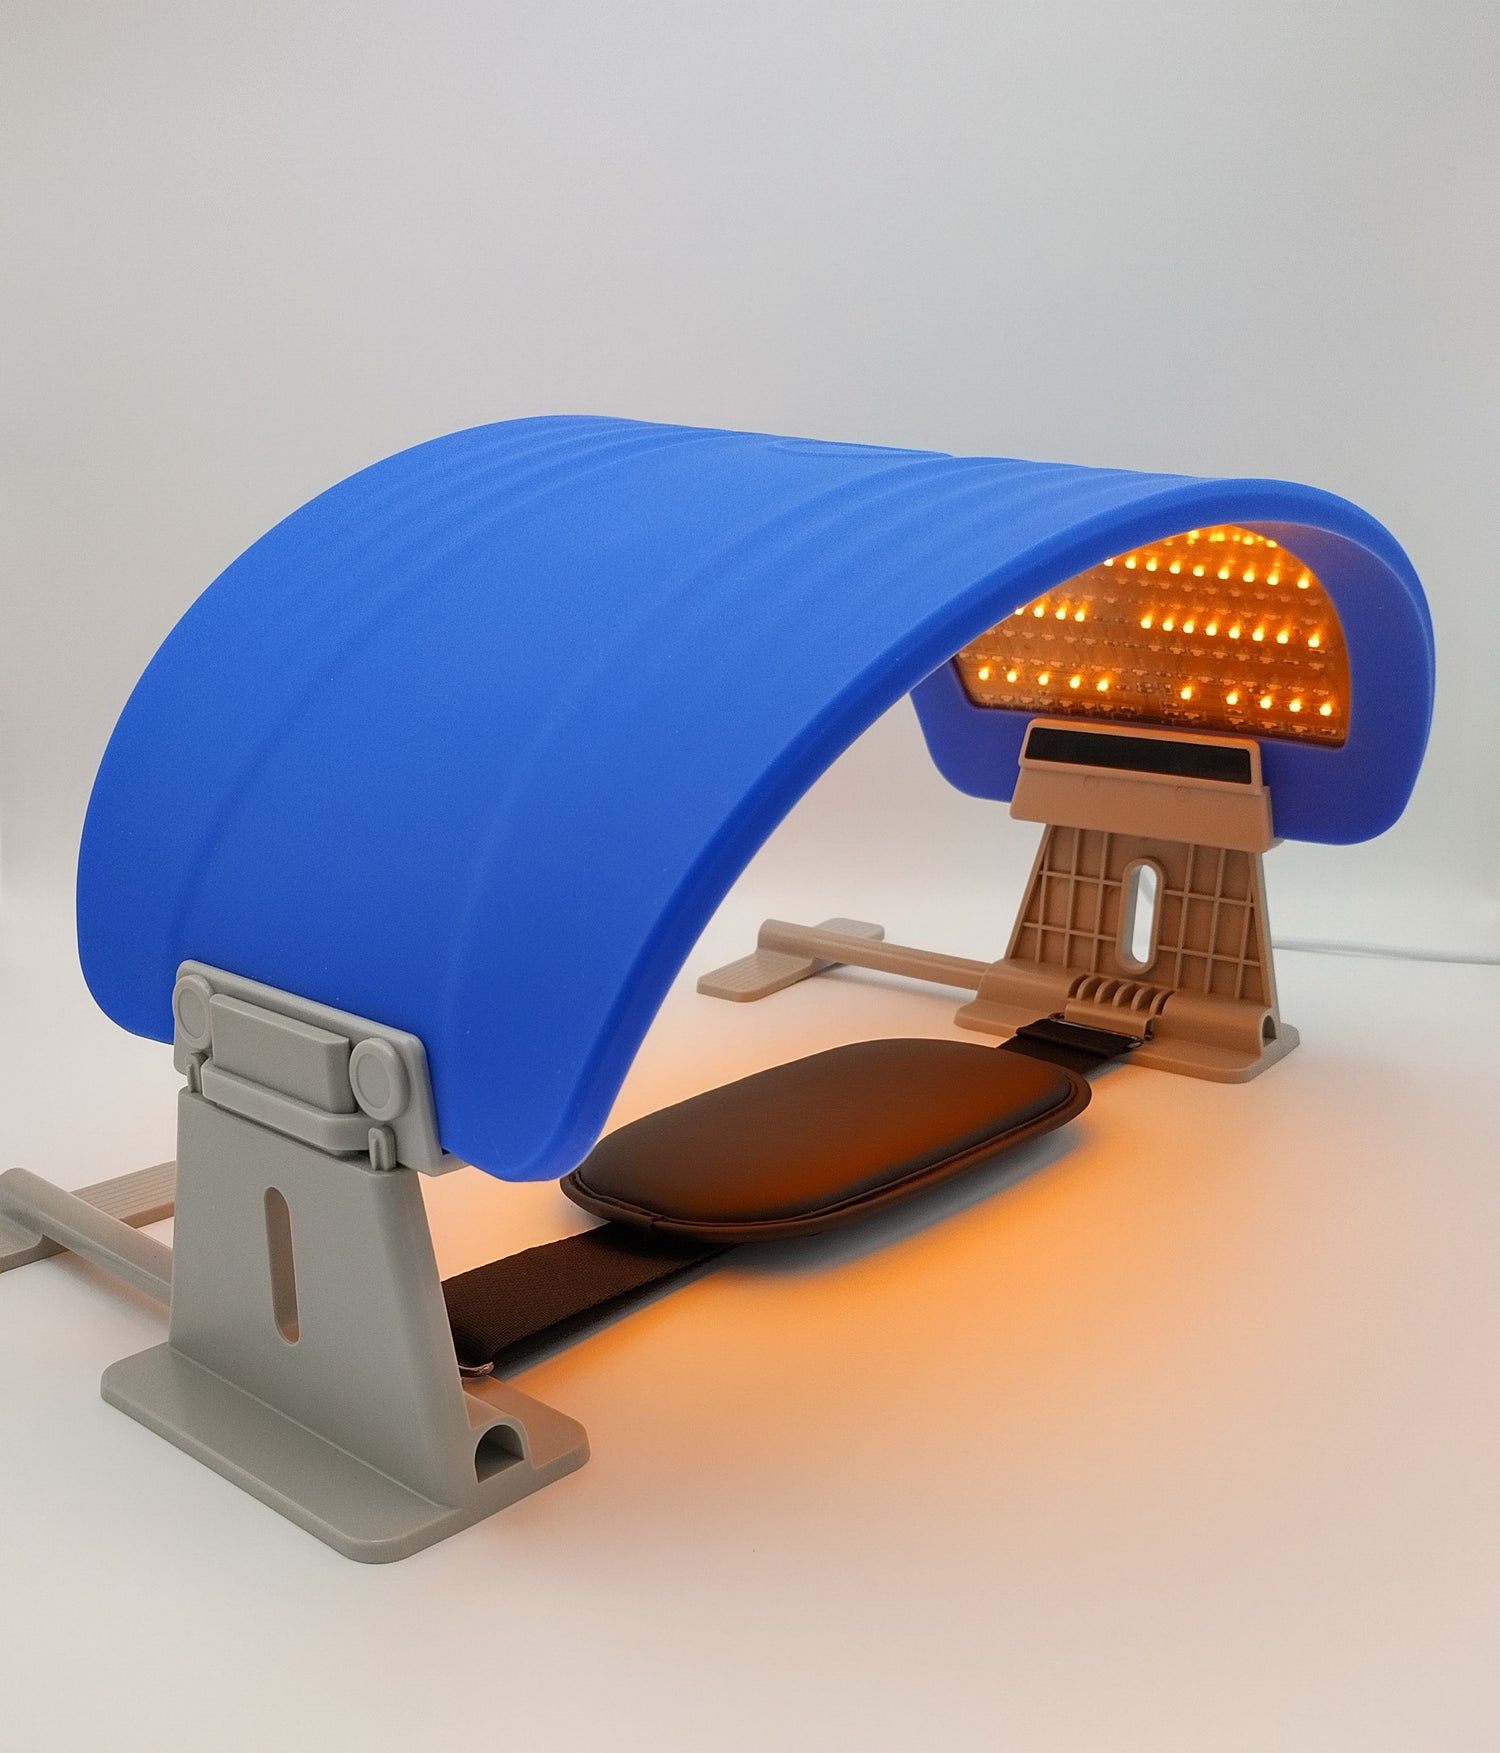 Light therapy device with three colors (yellow, blue, red) for healthy skin.